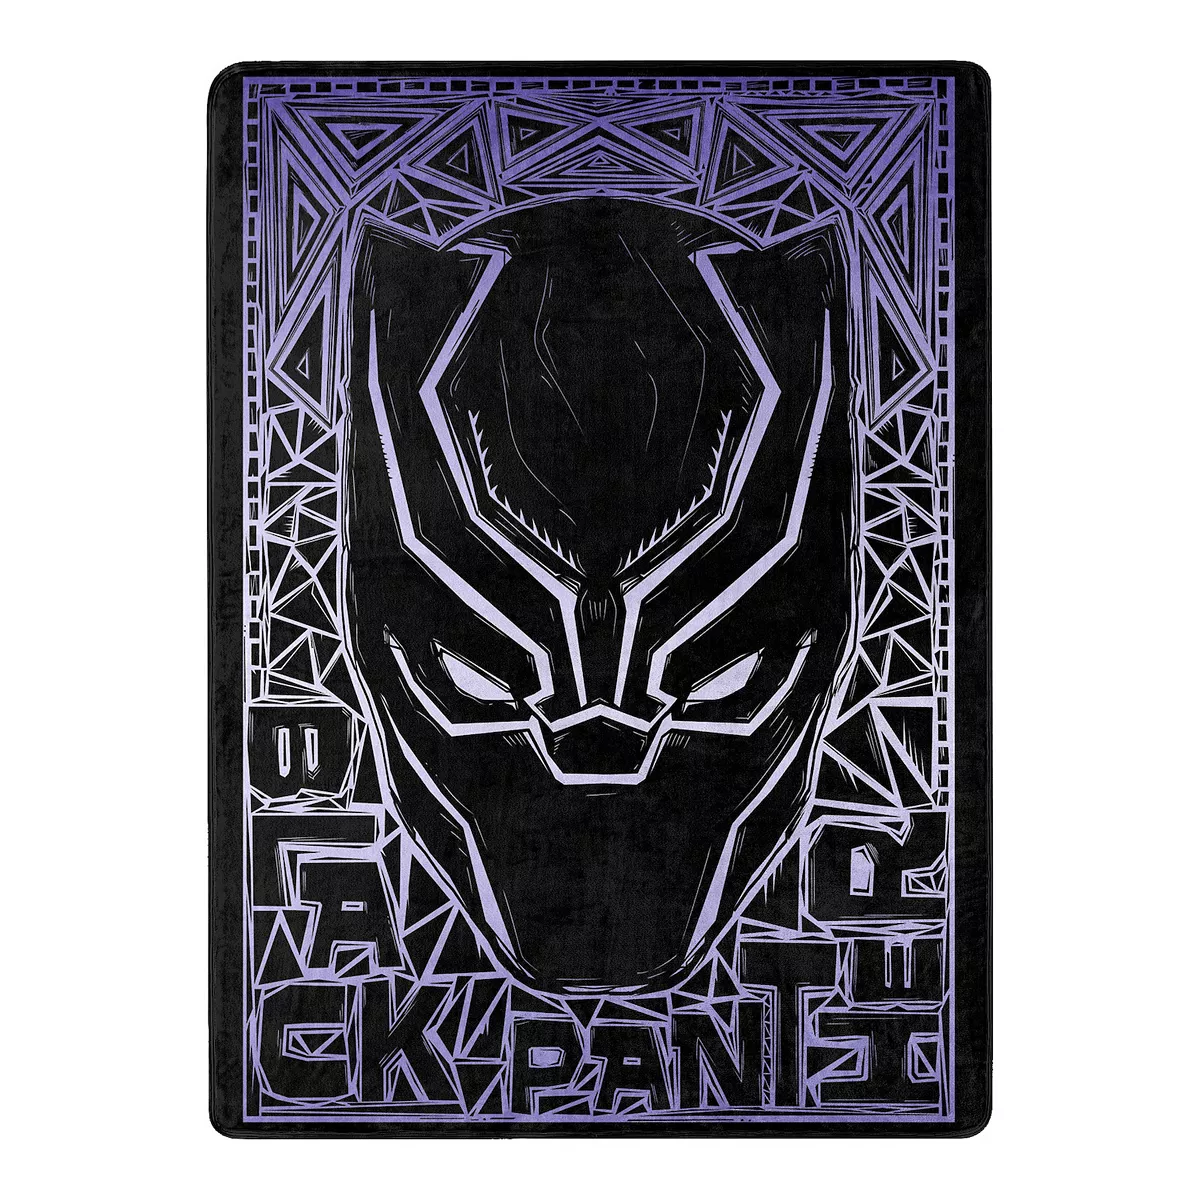 Black Panther Mask "Panther Stare" (Marvel) Silky Soft Throw Blanket